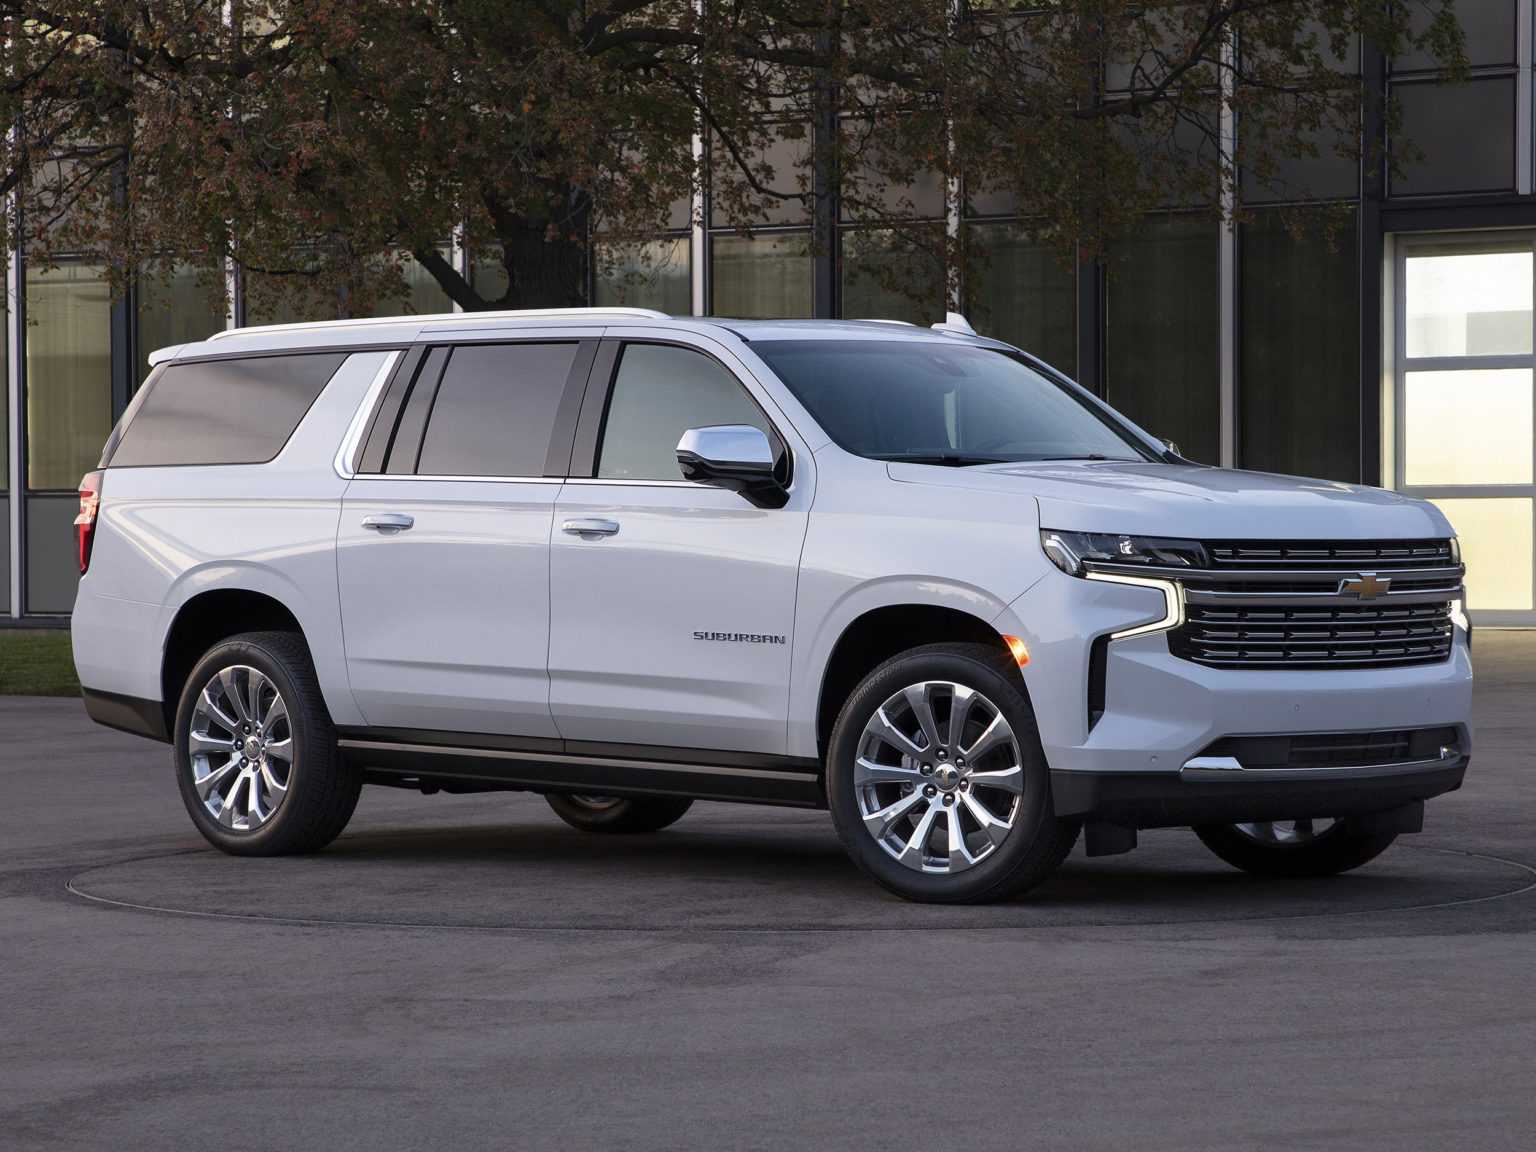 Chevrolet completely redesigned the Suburban for the 2021 model year.